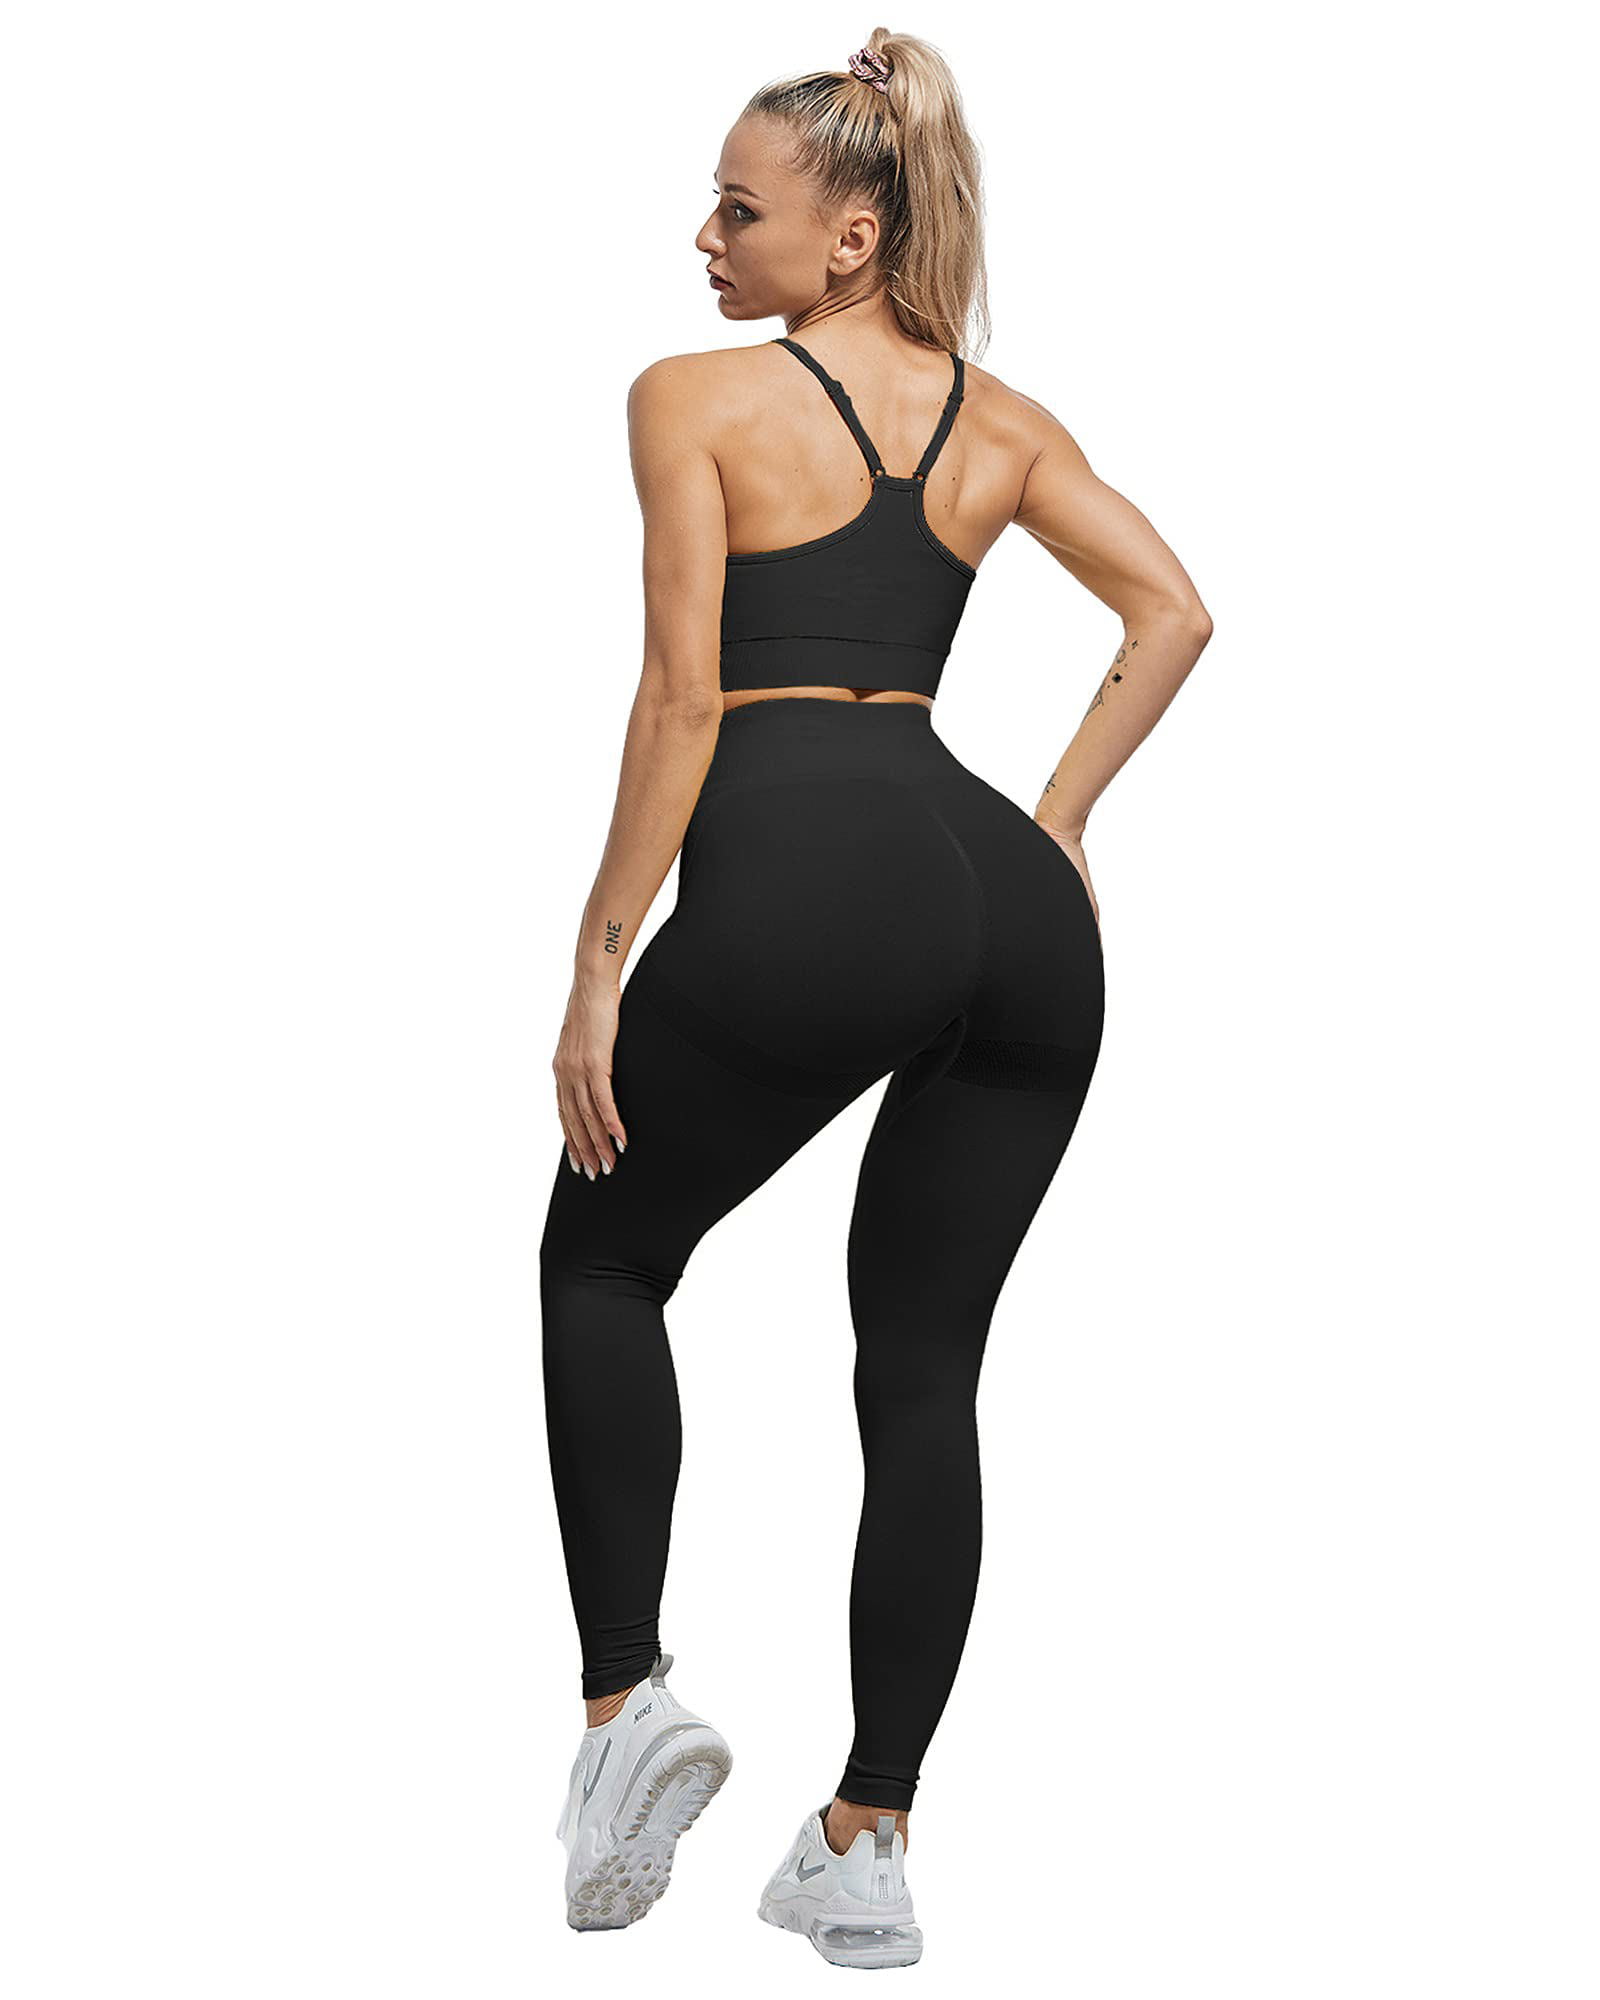 KARLYGASH Workout Leggings for Women, Buttocks Lifting and Tummy